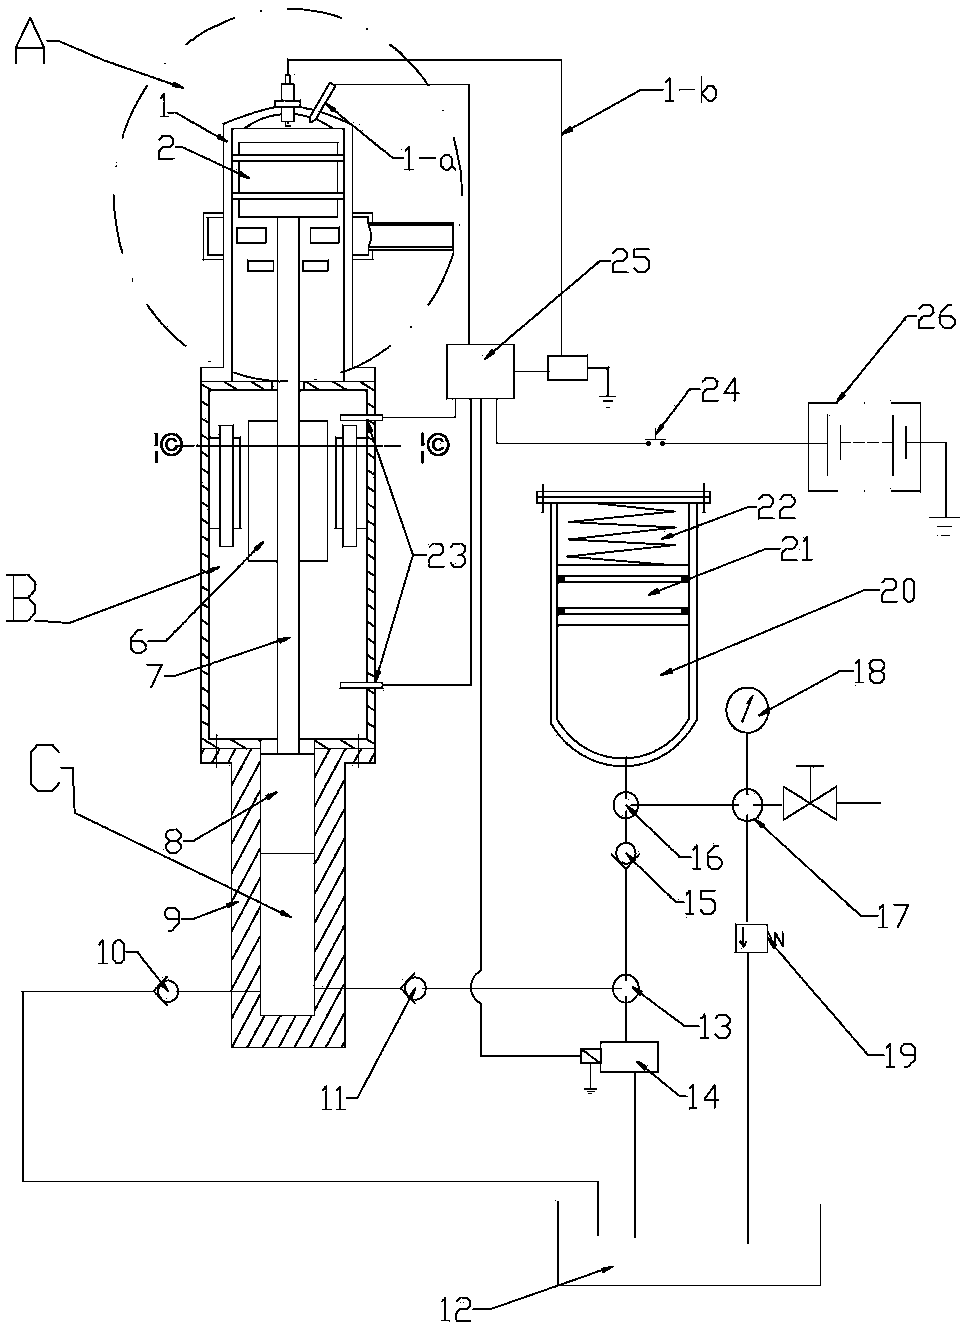 Internal-combustion electromagnetic hydraulic engine